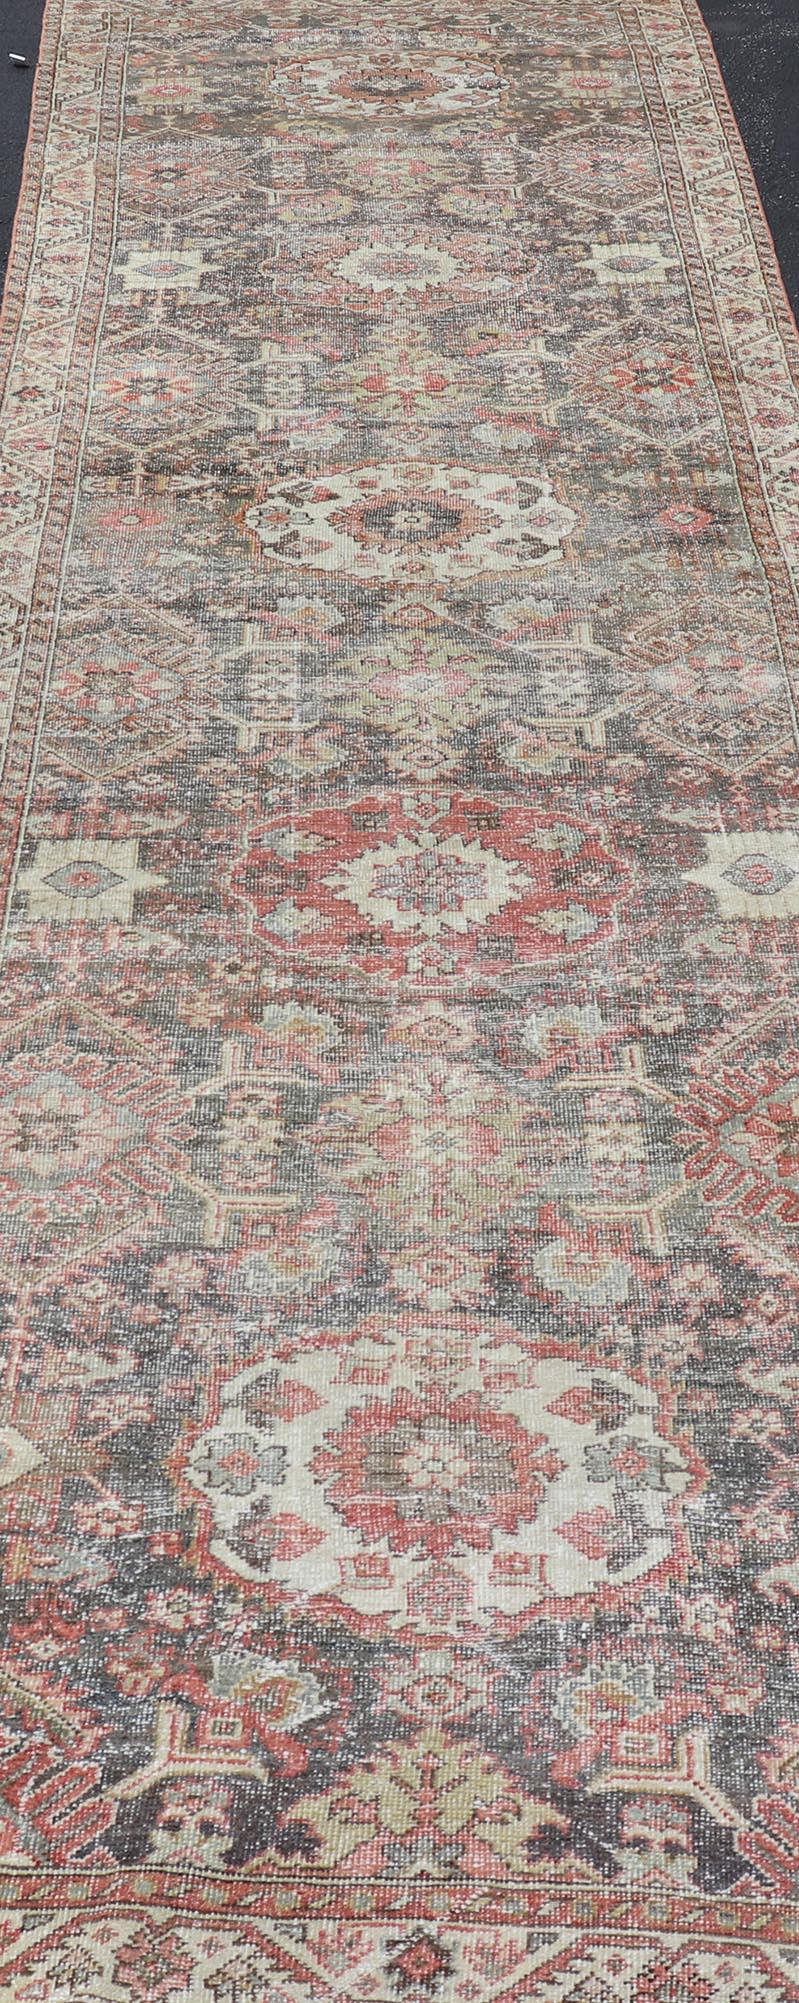 Antique Persian Sultanabad Gallery with Floral Design in Lt. Blue, Gray & Red. Keivan Woven Arts / rug EMB-22120-15007, country of origin / type: Persian / Sultanabad, circa Early-20th Century.
Measures: 4'2 x 15'4 
This stunning antique Sultanabad